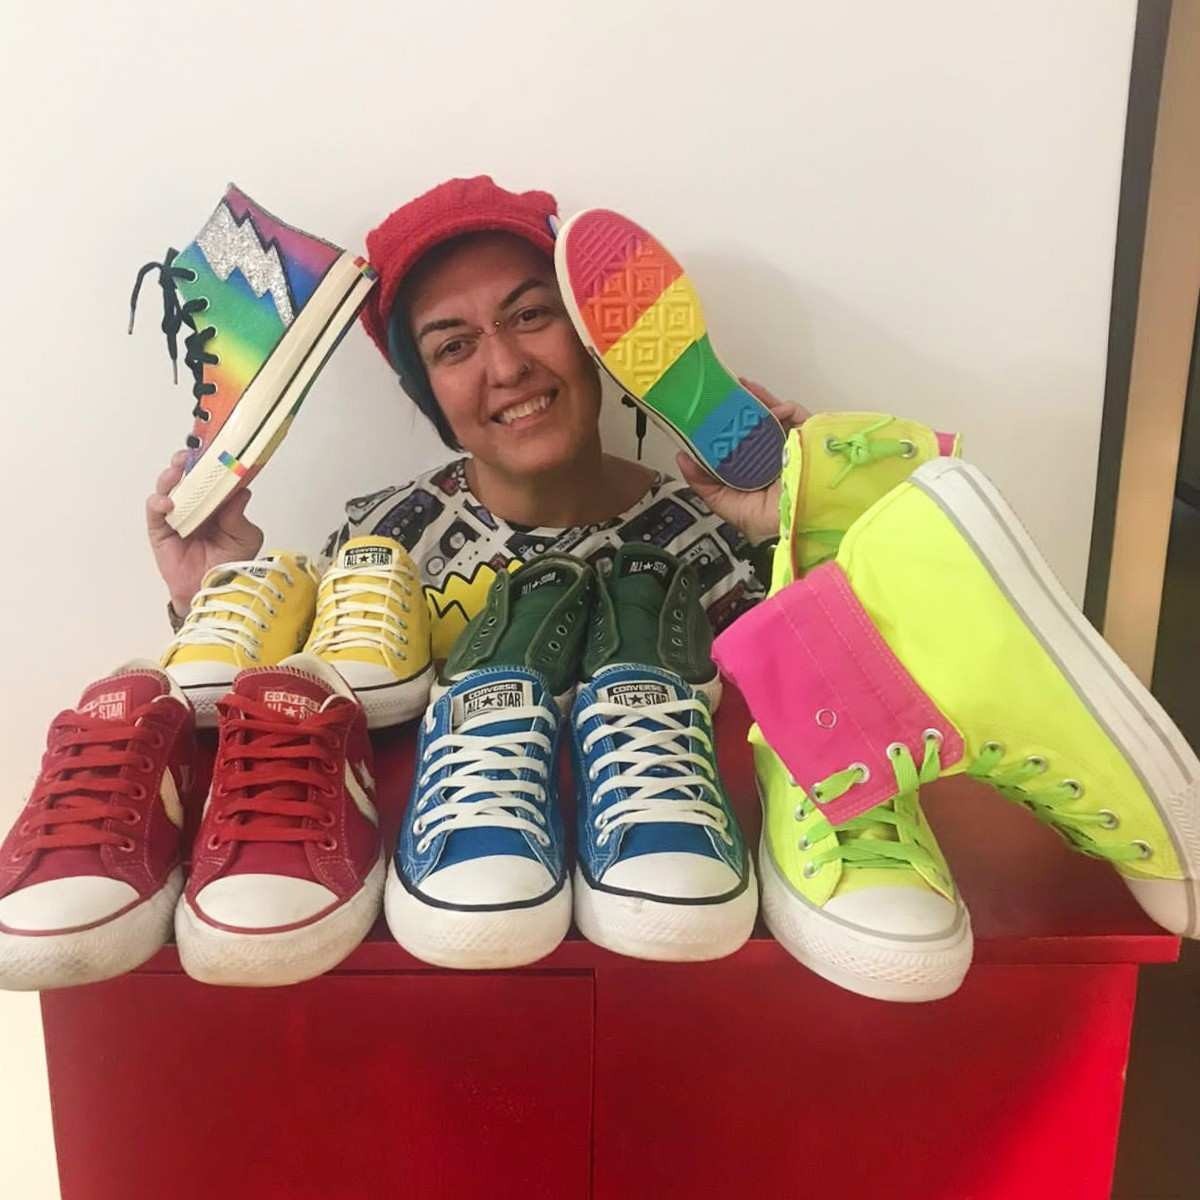 Luciene Carvalho with part of her All Star collection.  At the thrift store @lusaiudoarmario, you can check out other models from the brand